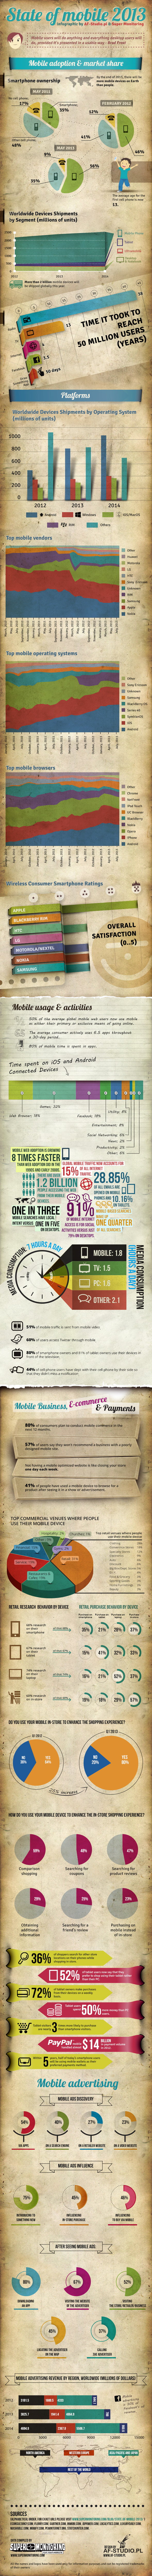 State of Mobile 2013 {Infographic}